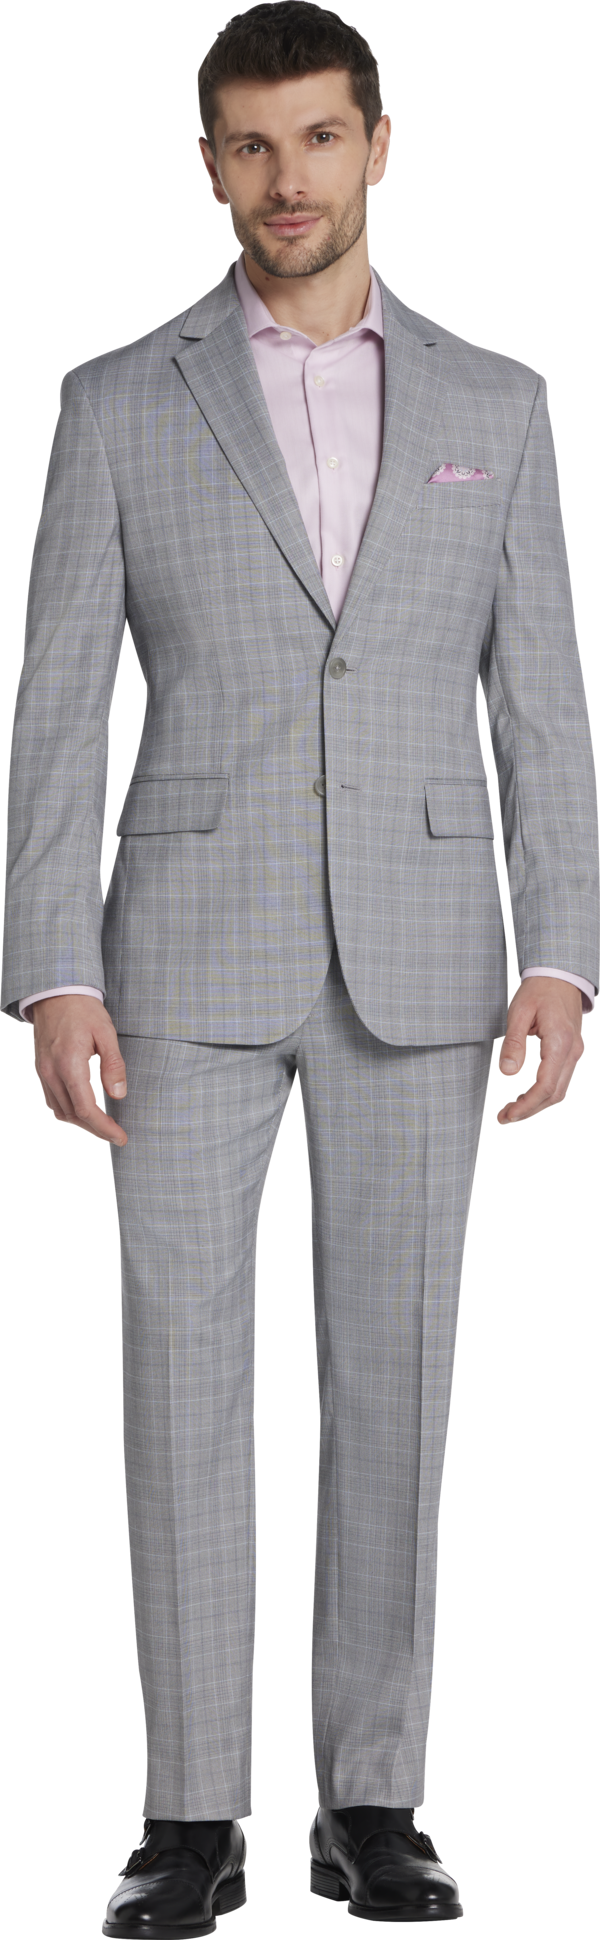 Pronto Uomo Men's Modern Fit Plaid Suit Separates Jacket Gray Plaid - Size: 36 Regular - Only Available at Men's Wearhouse - Gray - male